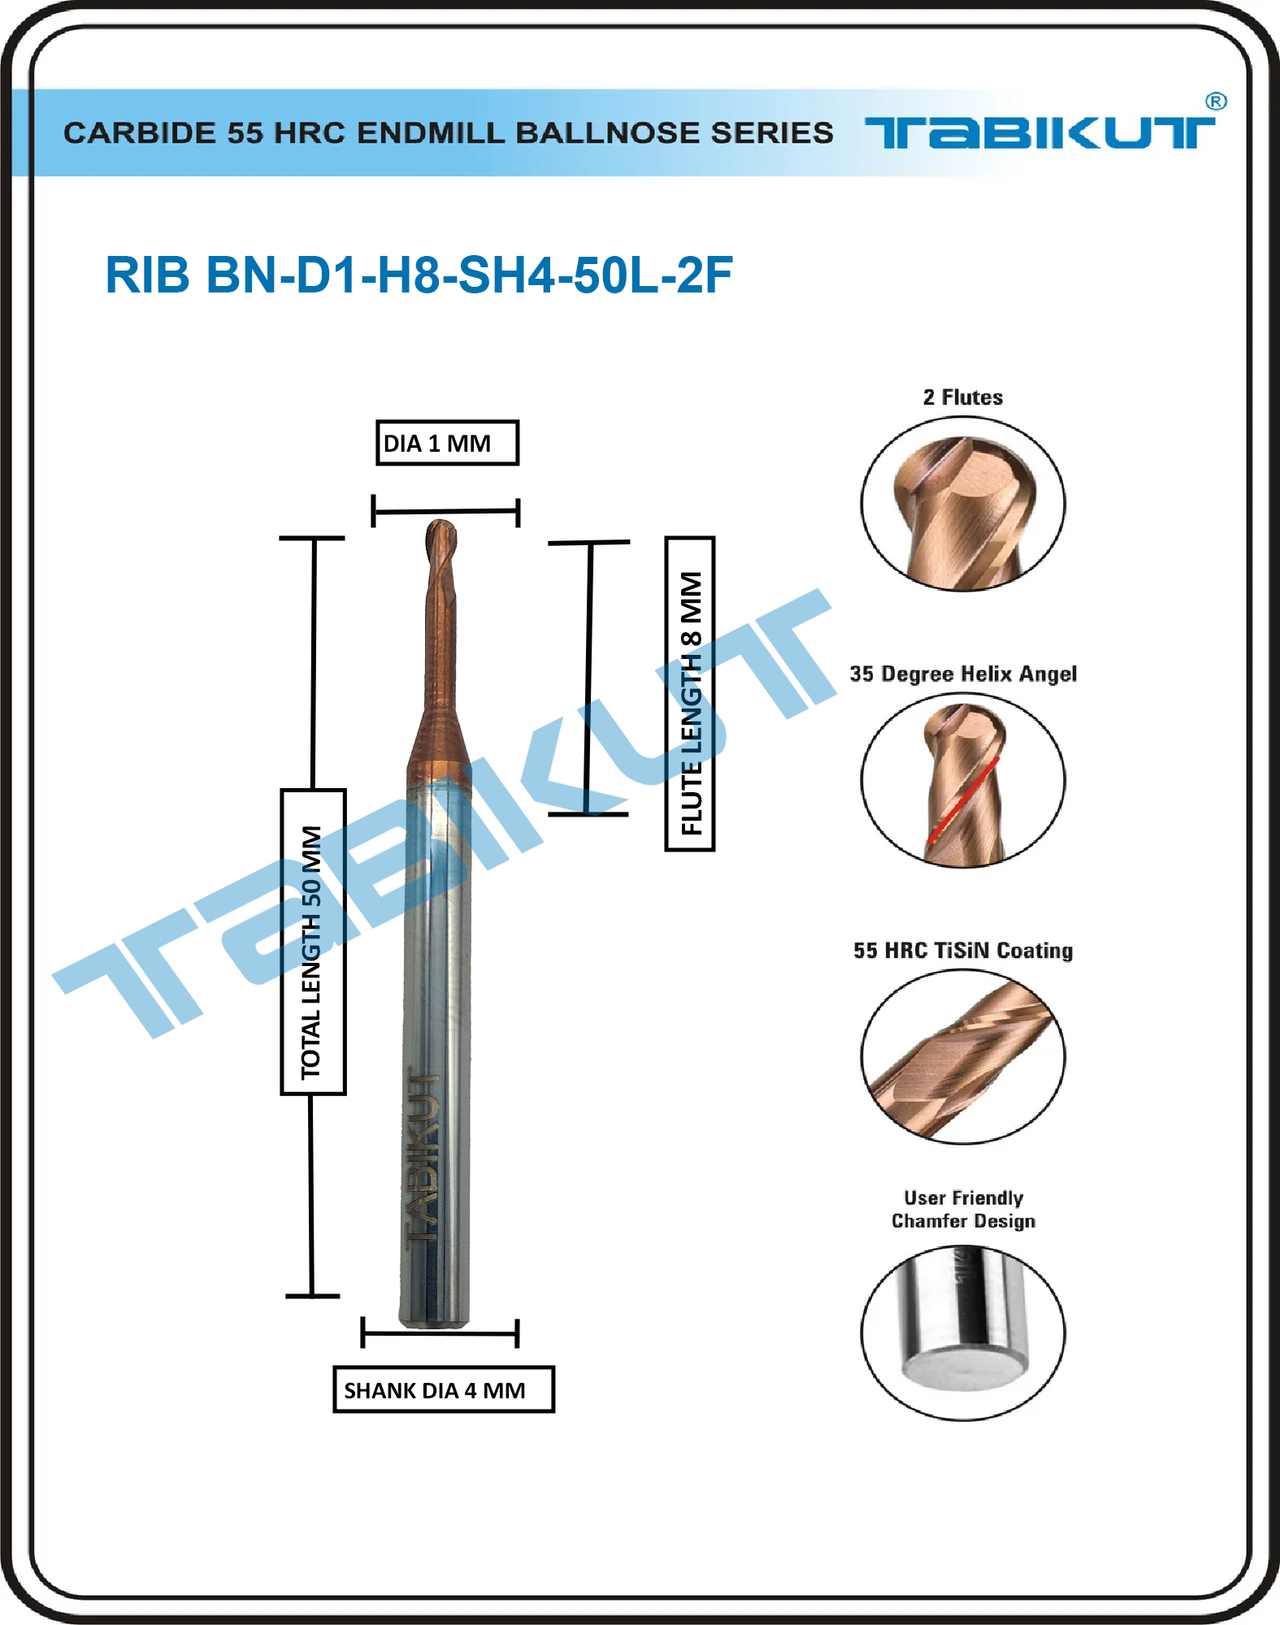 Rib Cutter ballnose 1 mm- 2 flute 55 hrc pack of 1